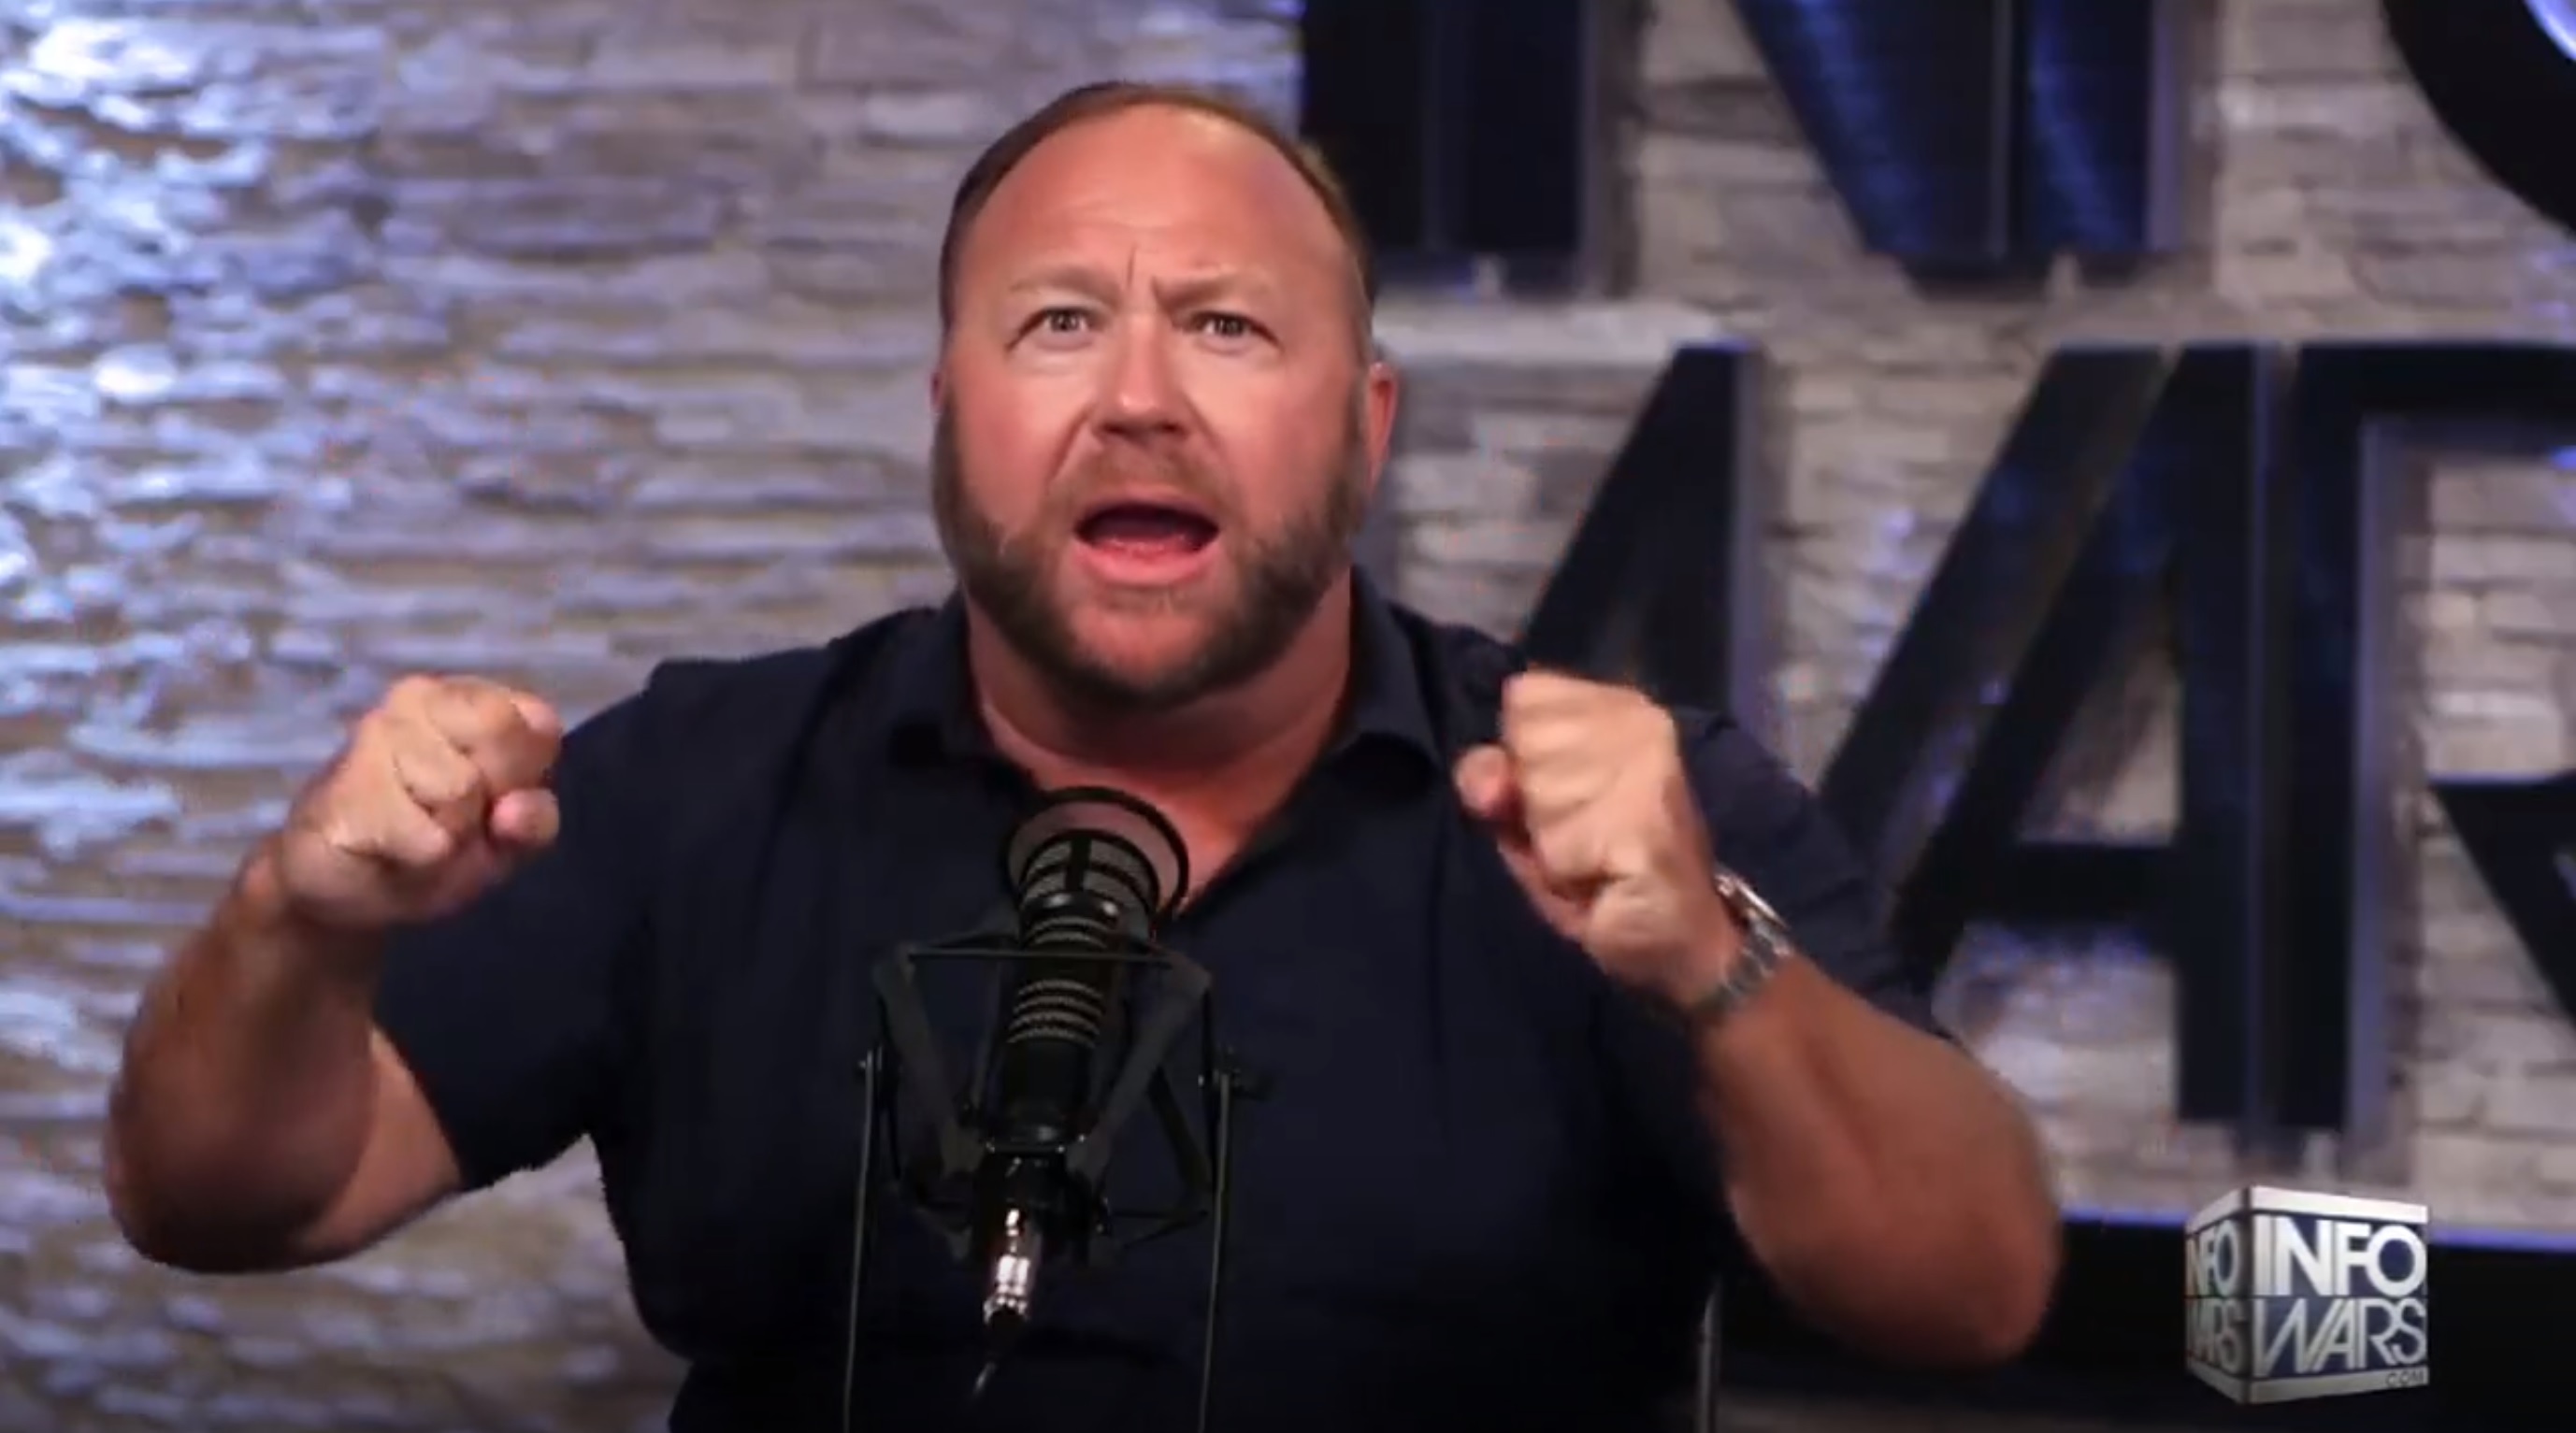 Alex Jones Wants 100,000 From Sandy Hook Families Suing Him for Defamation